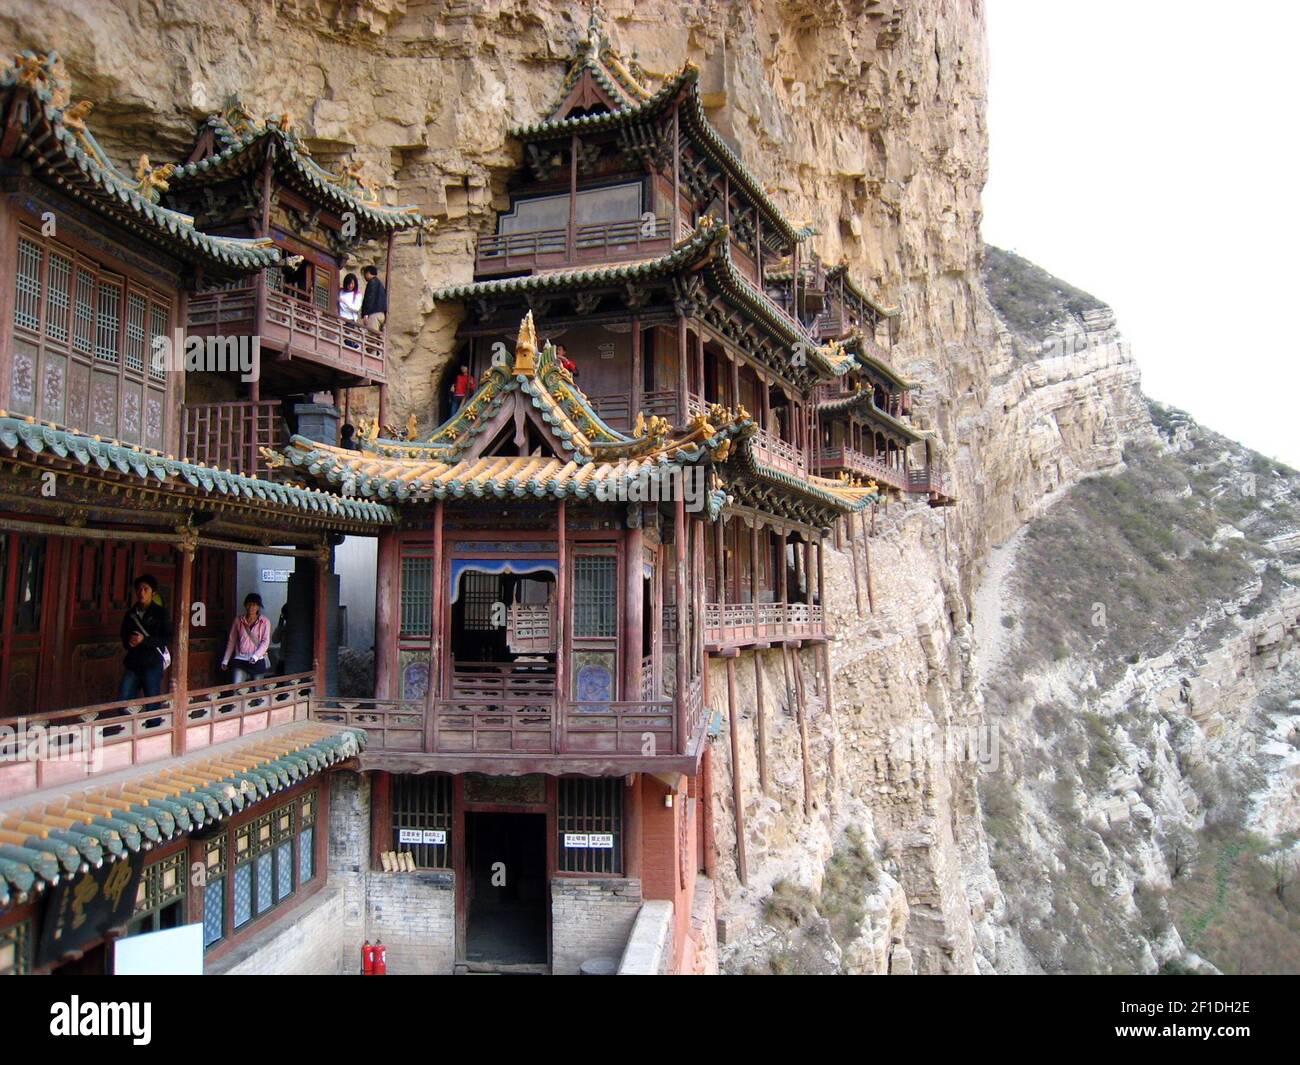 The Hanging Temple, an ancient monastery perched on the side of a cliff, is  one of the sites tourists usually come to see in Datong, China. (Photo by  Carol Pucci/Seattle Times/MCT/Sipa USA